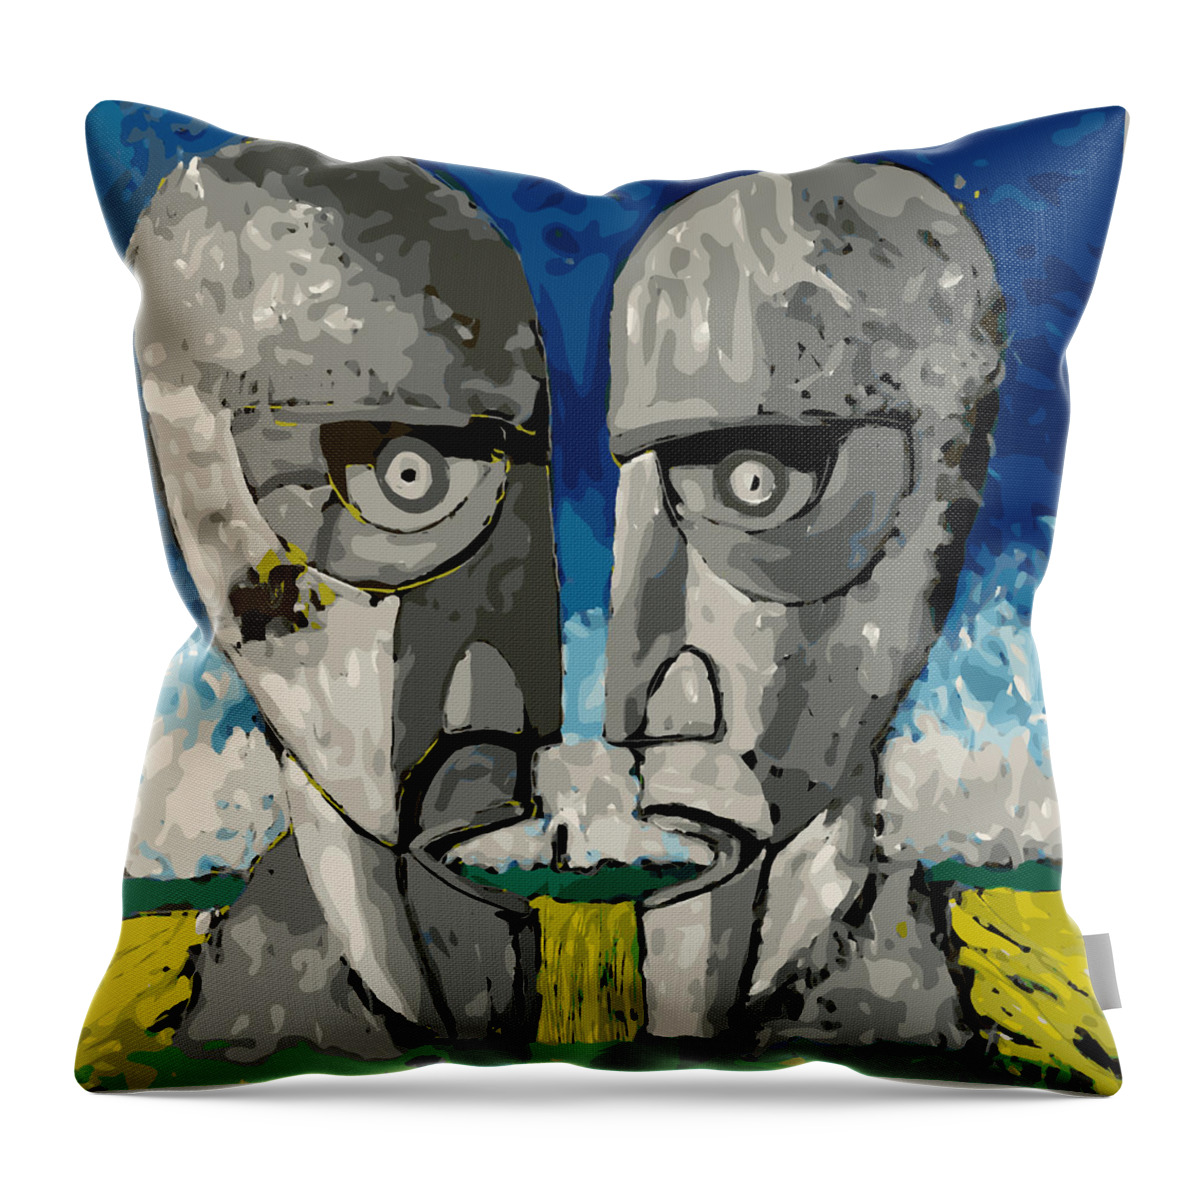 Painted Live During Floydian Slip Throw Pillow featuring the painting Division Bell by Neal Barbosa